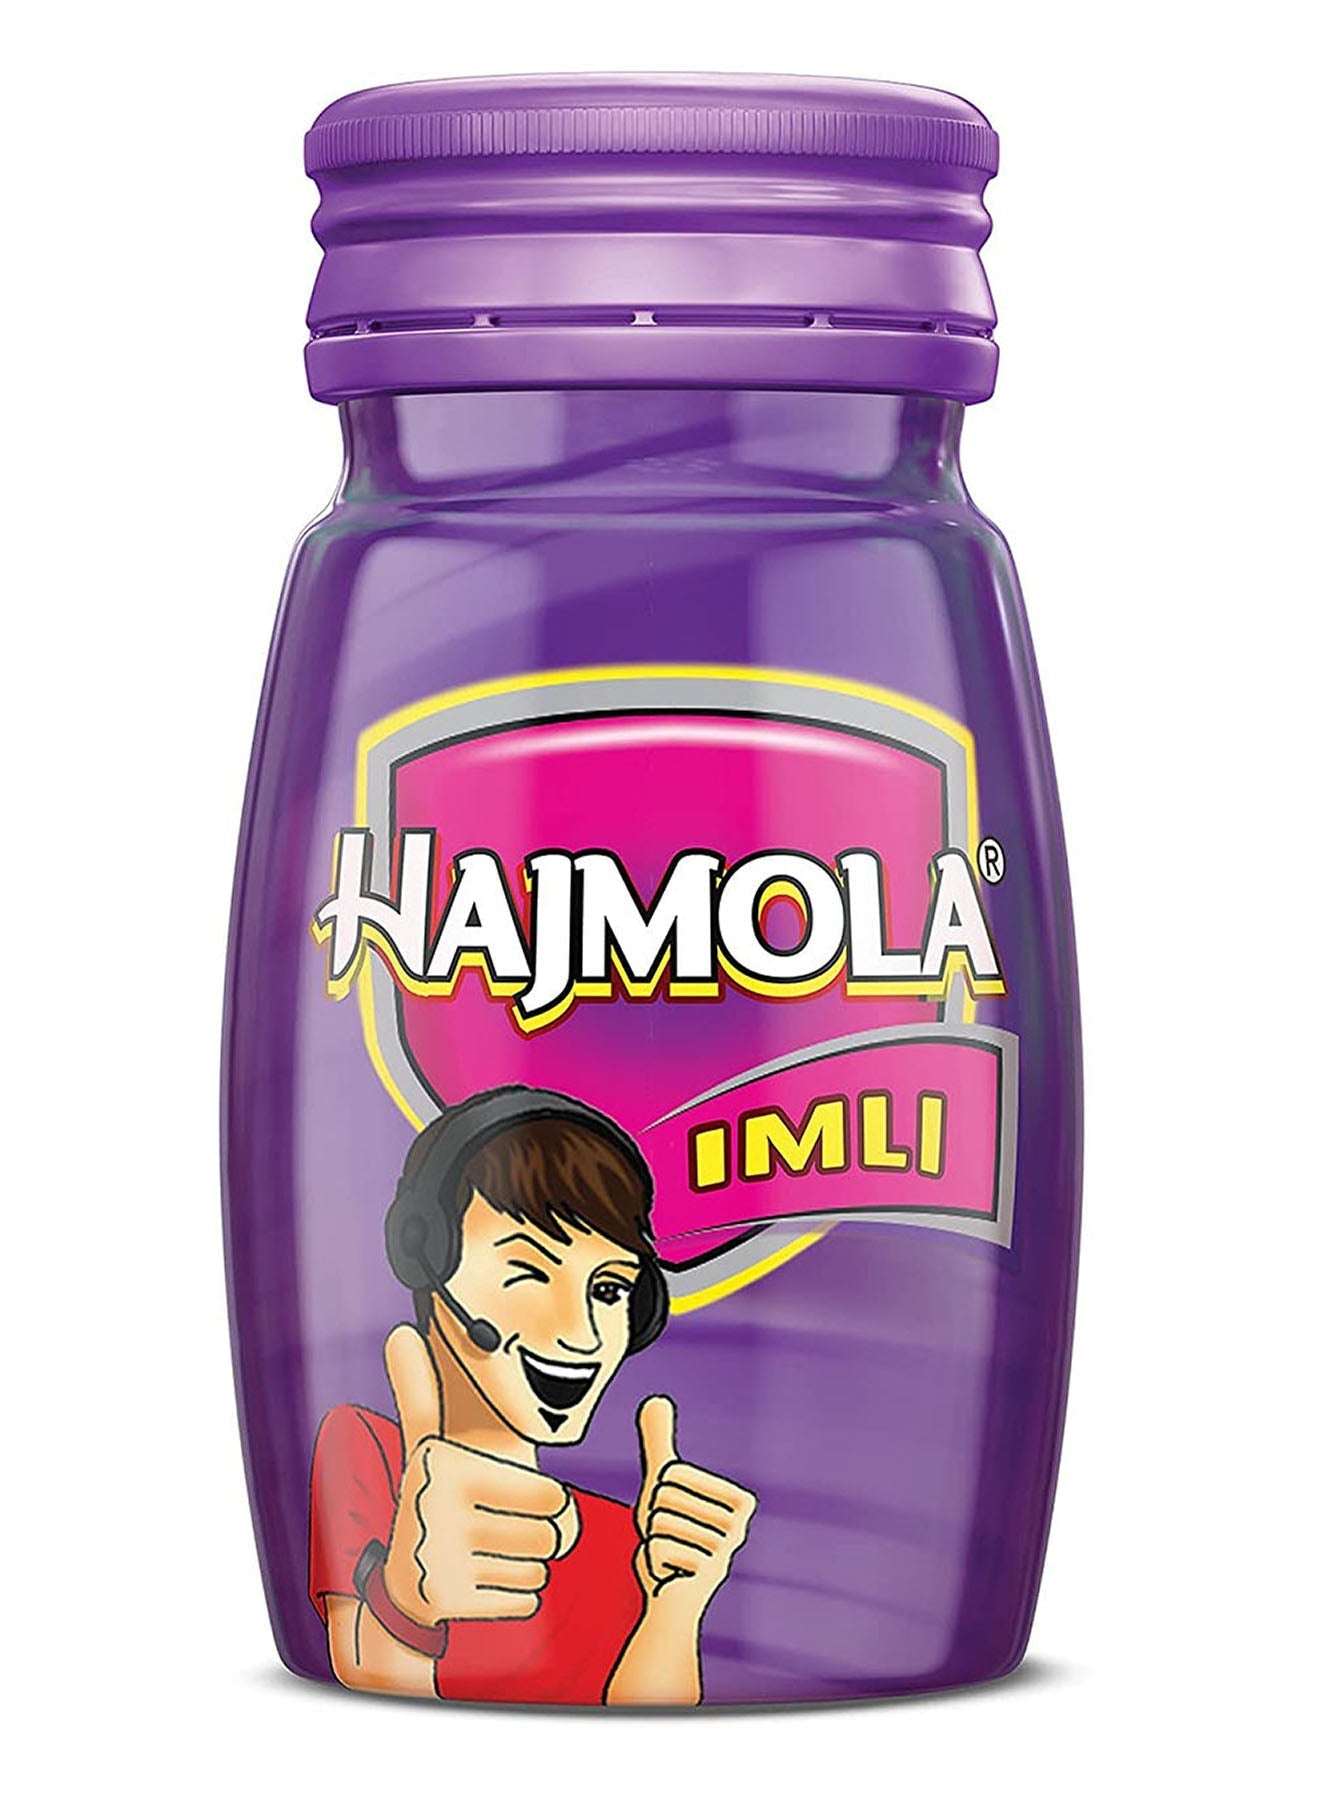 Dabur Hajmola Tasty Digestive Tablets for Improved Digestion and Relief from Flatulence  Imli Flavour 120 Tabs